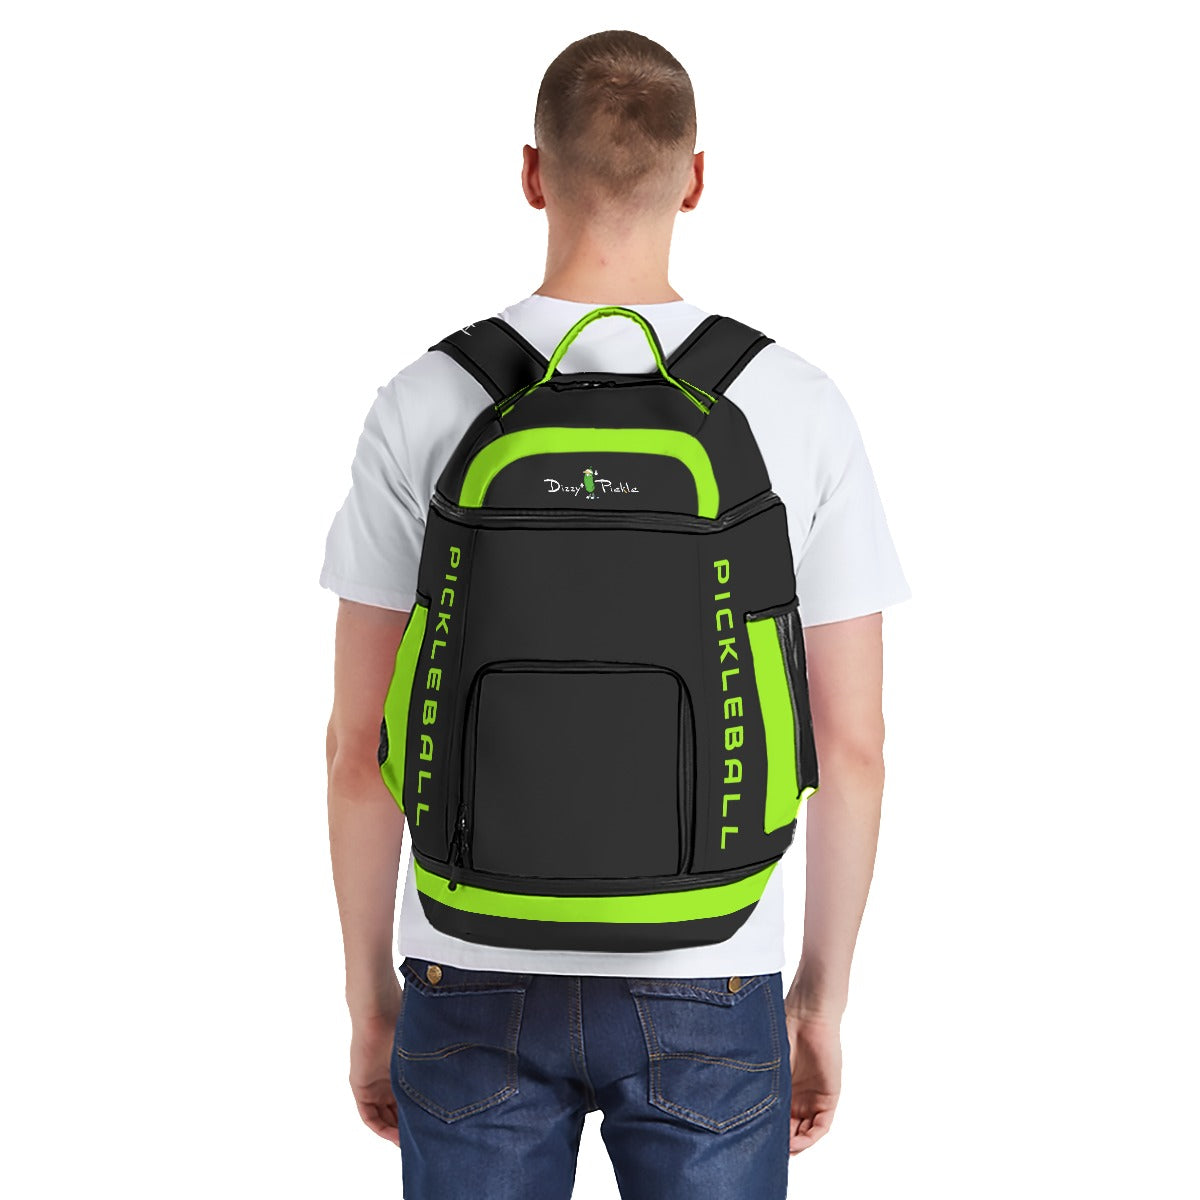 Dizzy Pickle DZY P Classic DW7 Unisex Large Courtside Pickleball Multi-Compartment Backpack with Adjustable Straps